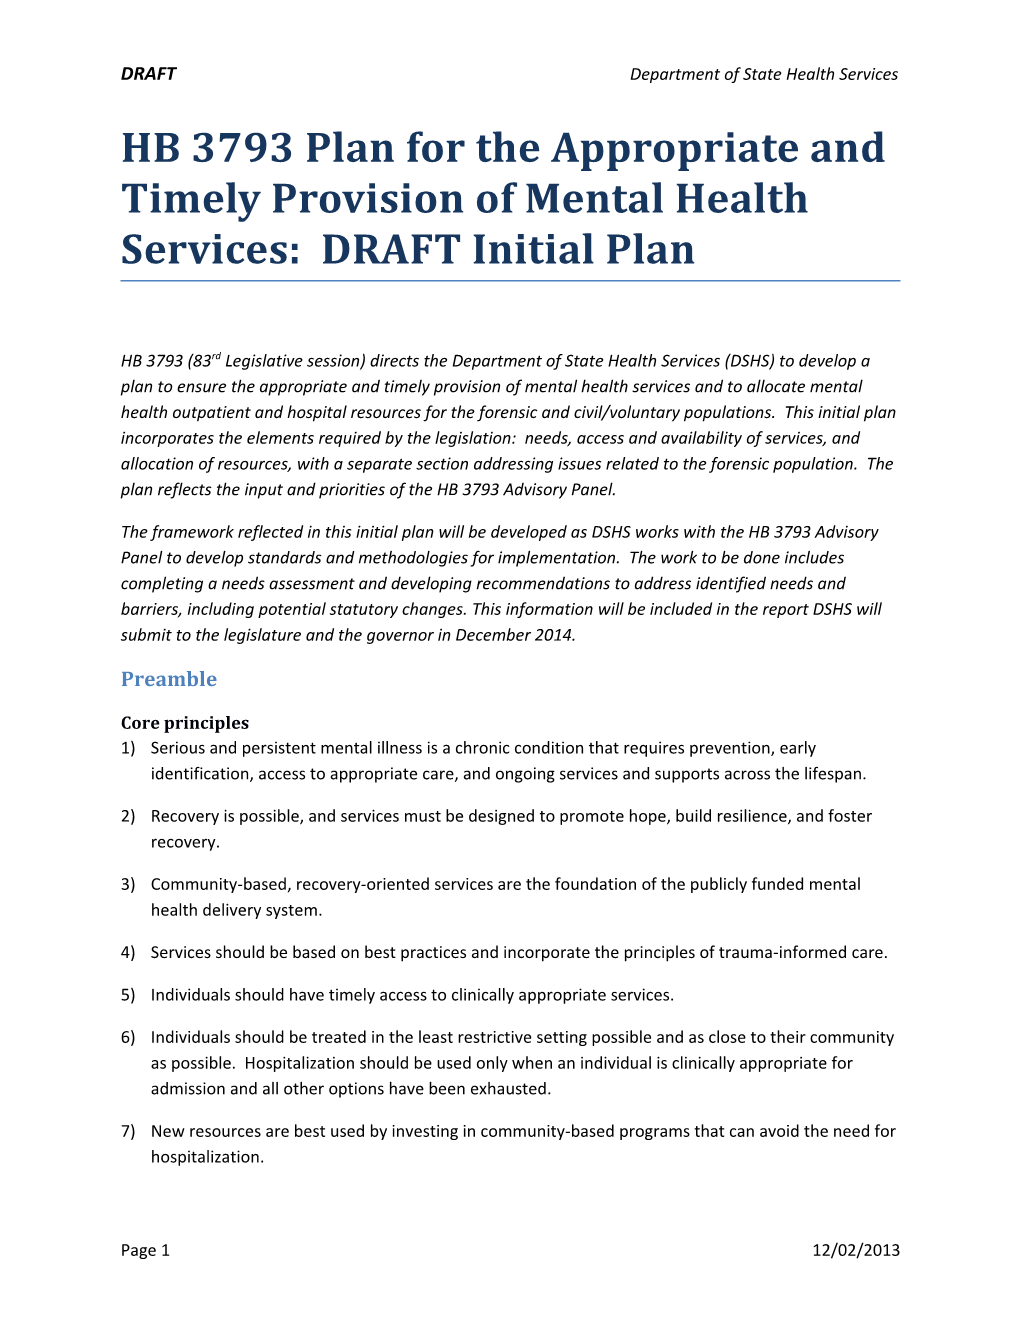 HB 3793 Plan for the Appropriate and Timely Provision of Mental Health Services: DRAFT